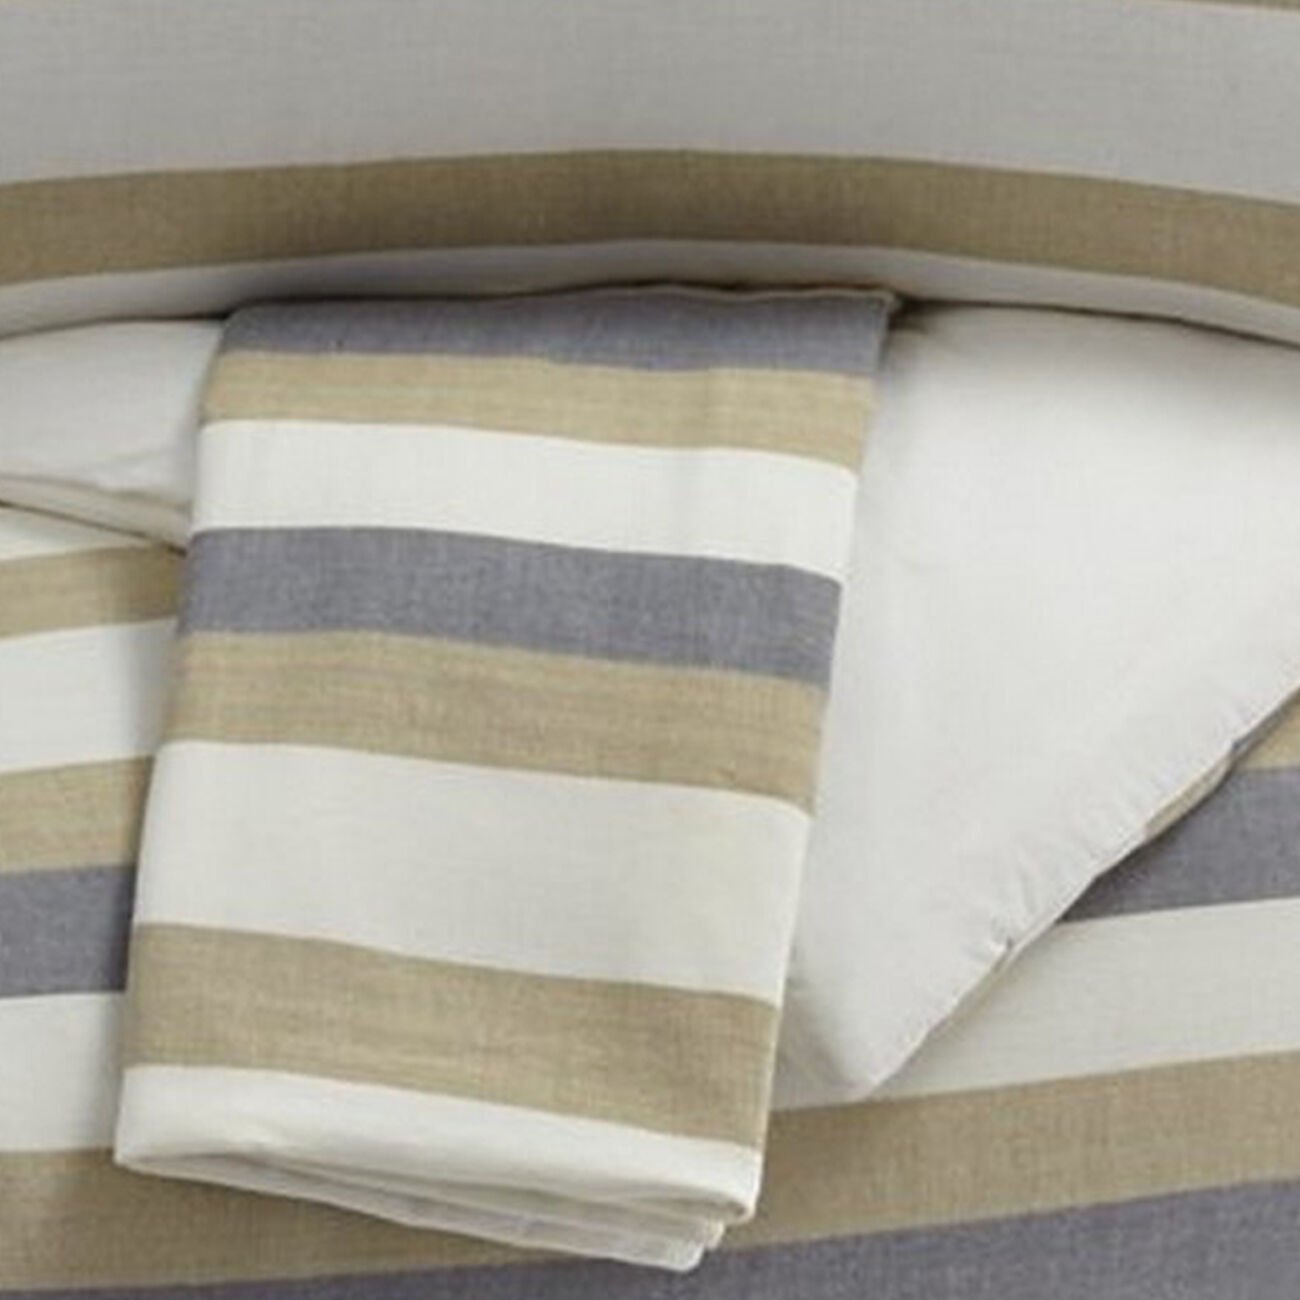 3 Piece Fabric Queen Comforter Set with Striped Print, Gray and Brown